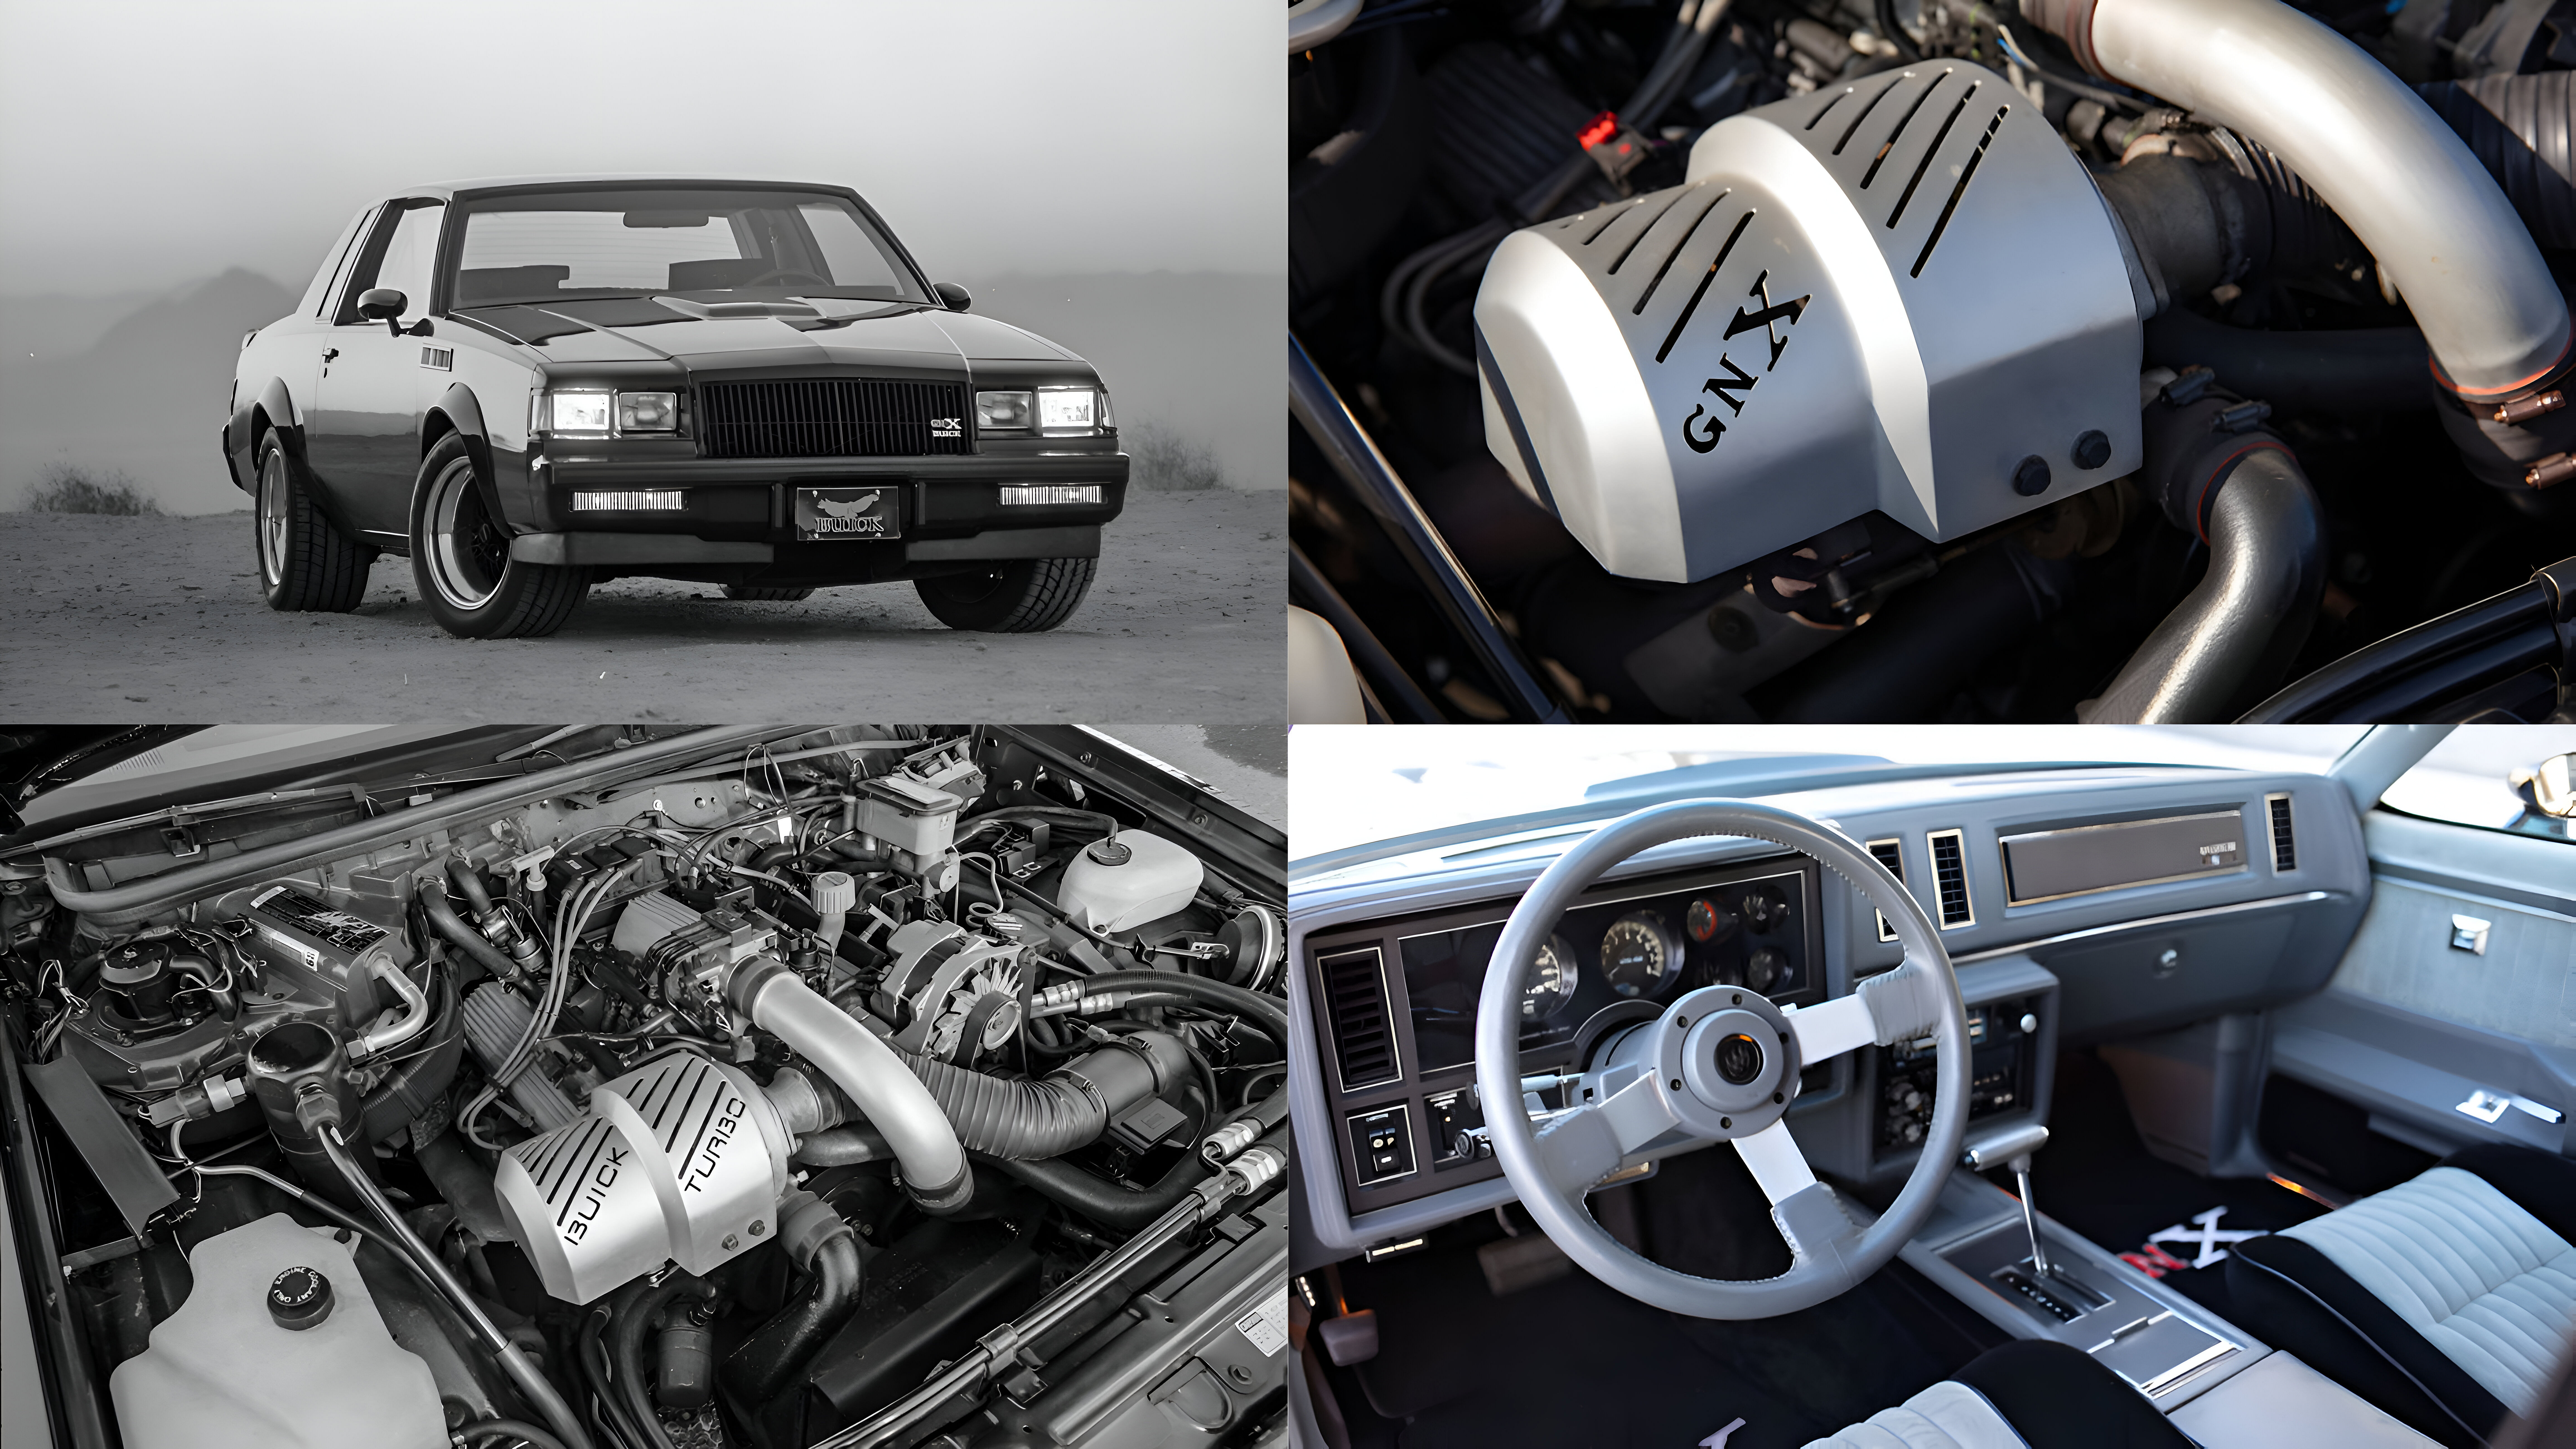 1987 Buick regal GNX, engine and interior